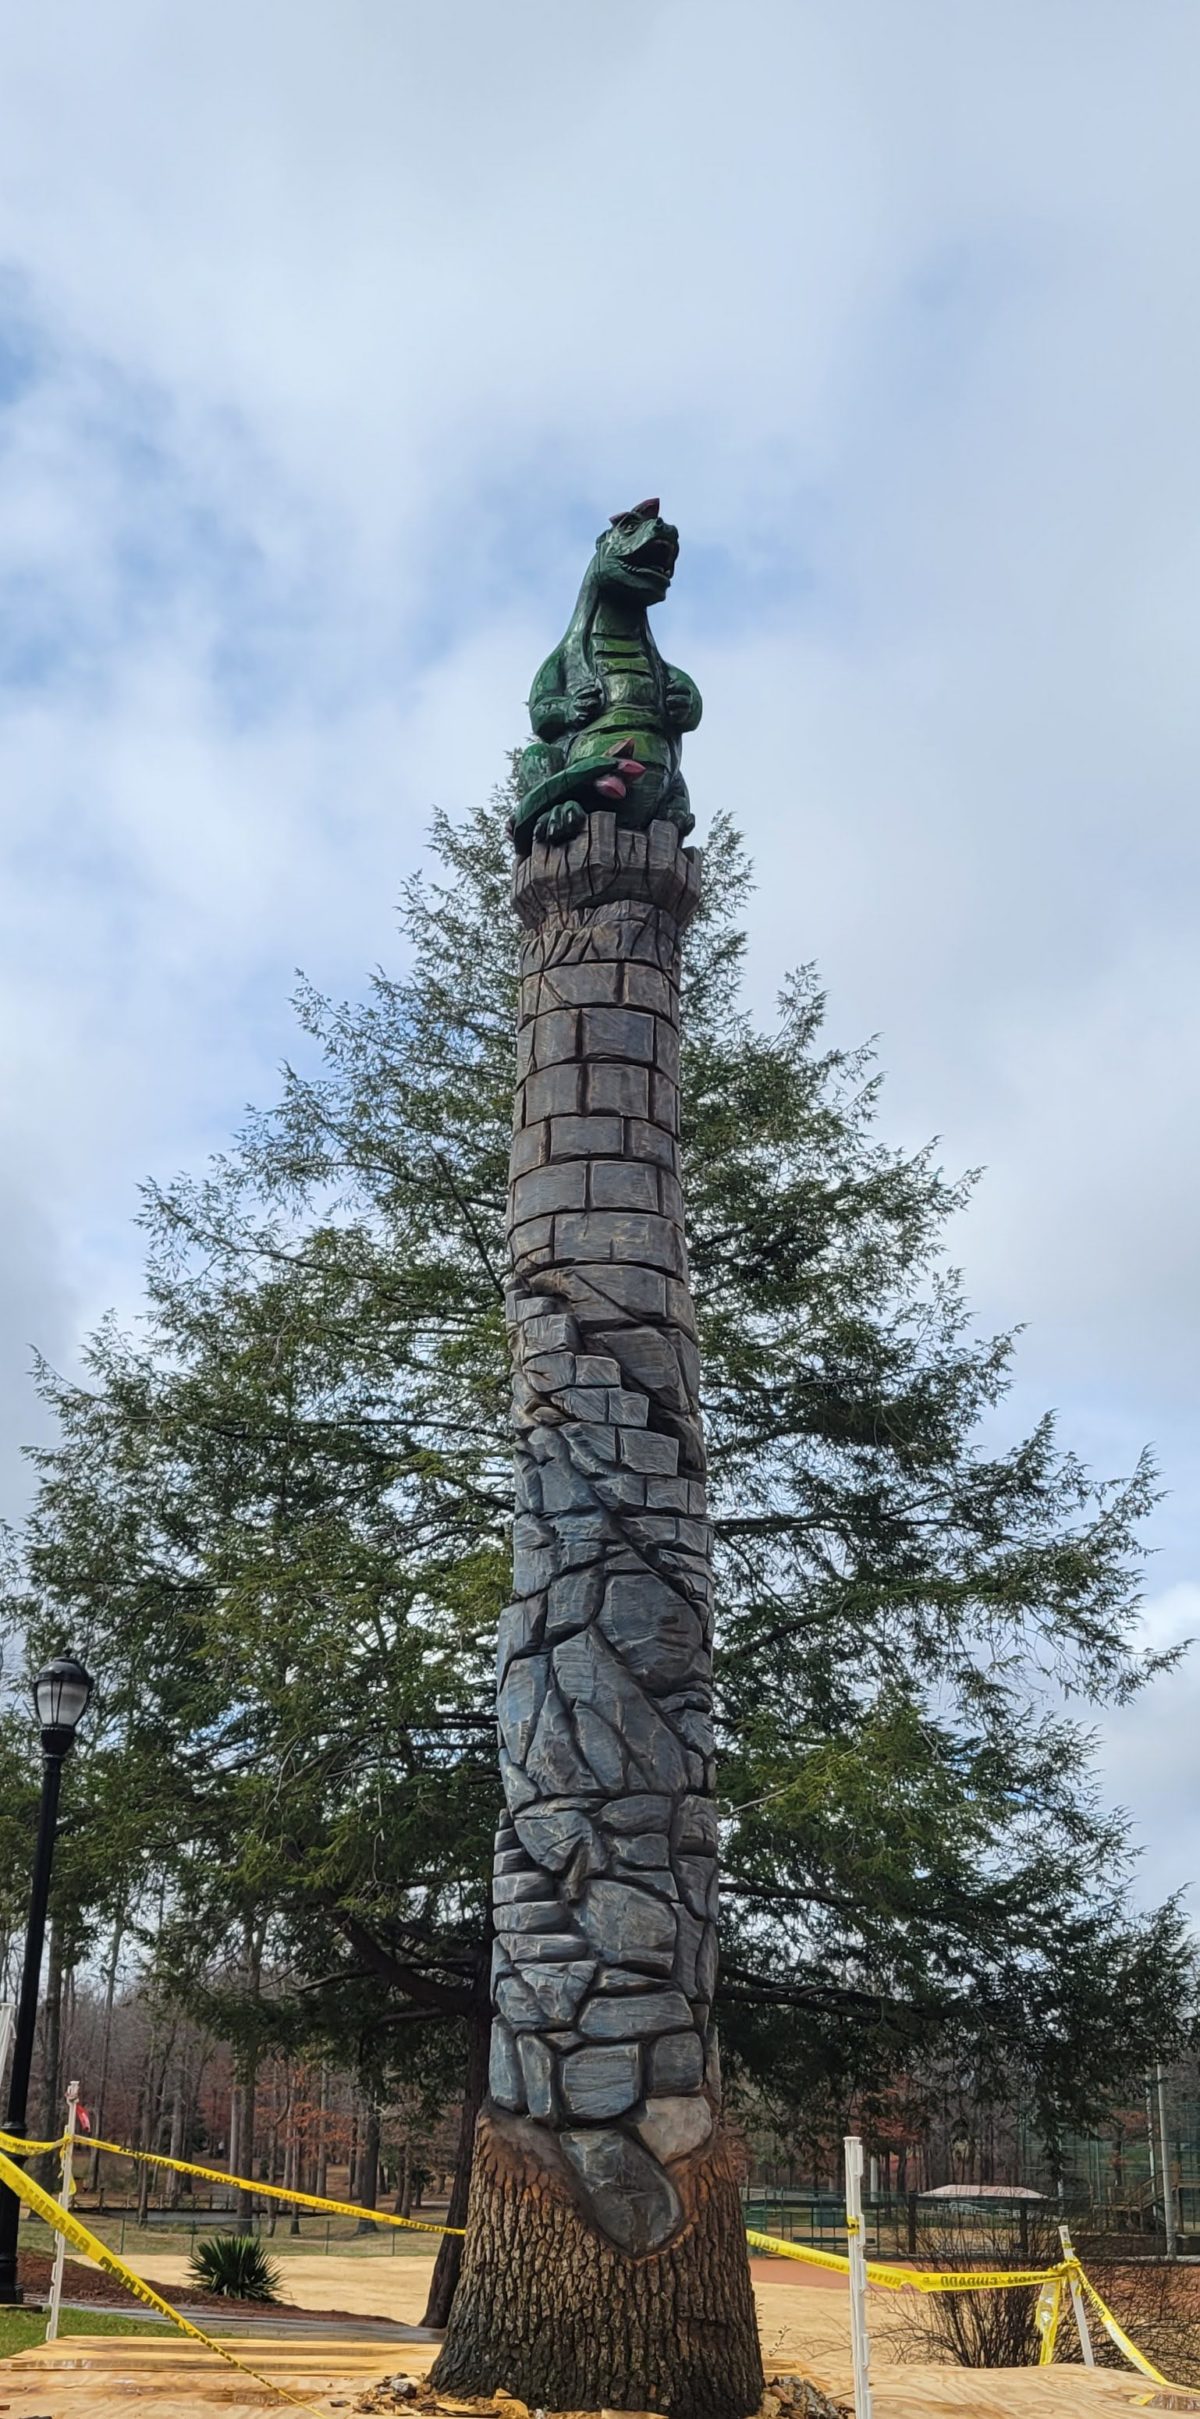 A tall tower carved from a single tree with a dragon on top.